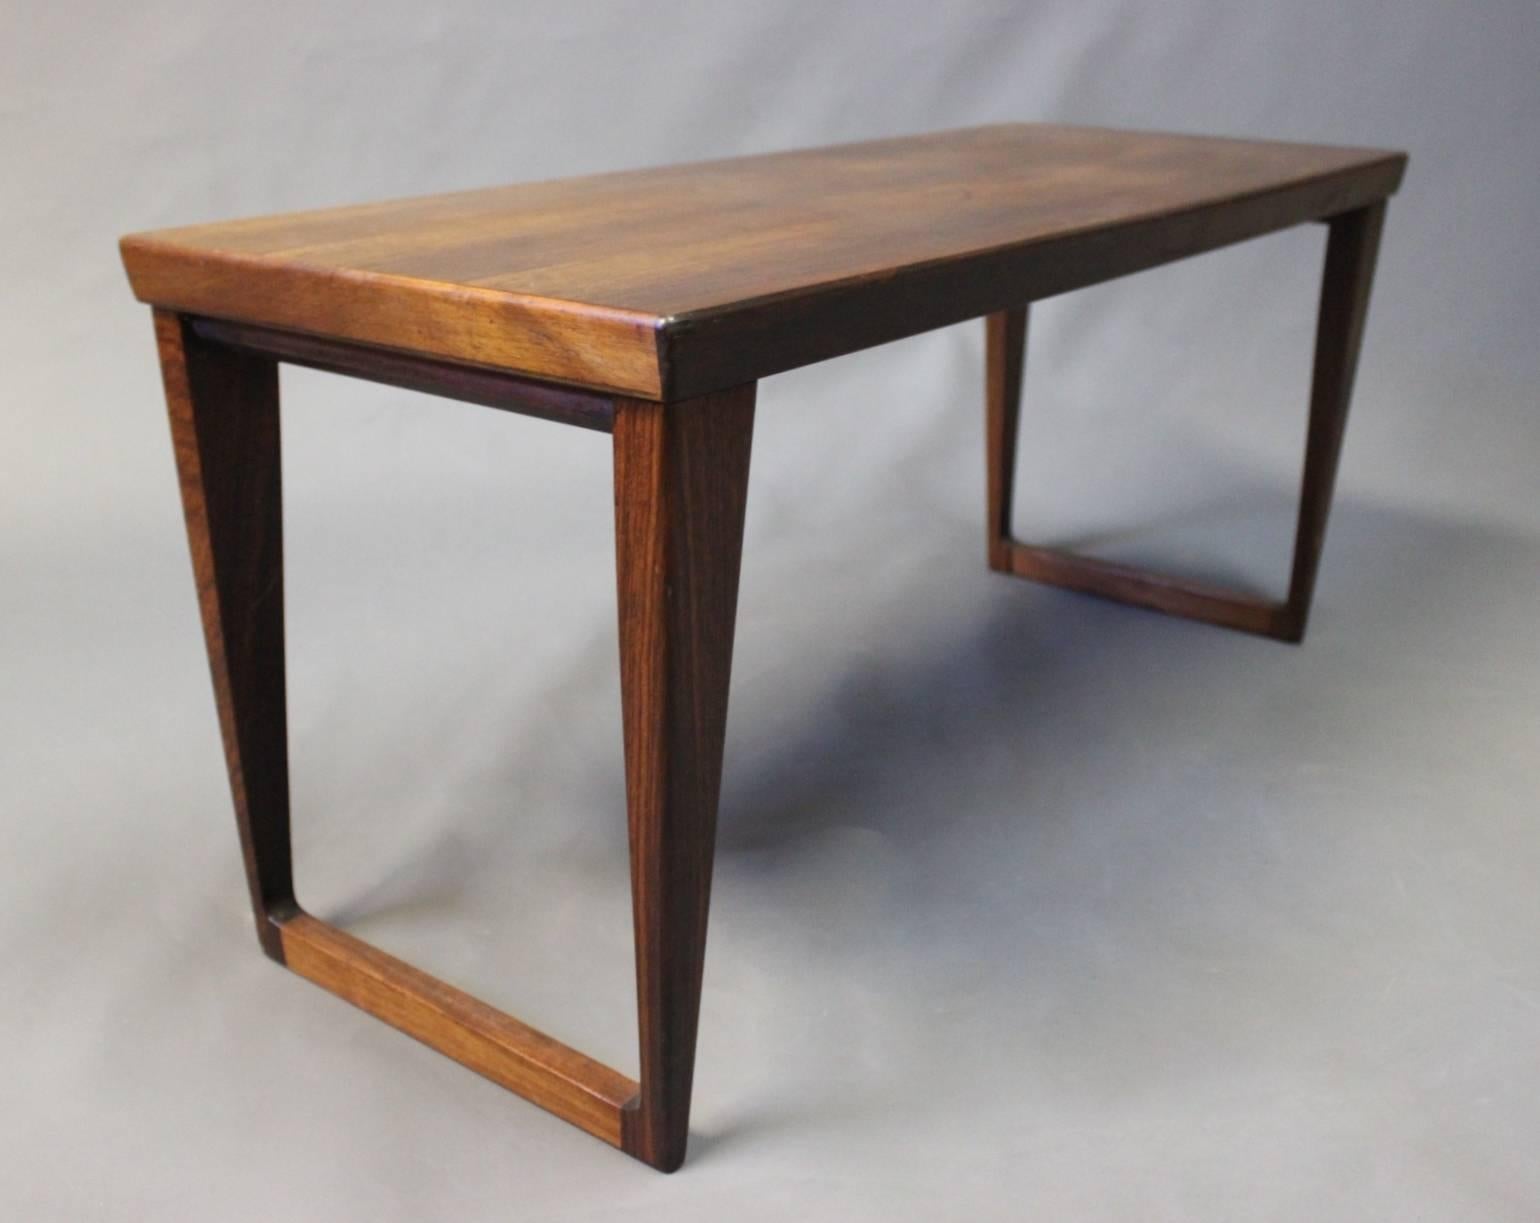 Scandinavian Modern Small Coffee or Side Table in Rosewood of Danish Design, 1960s